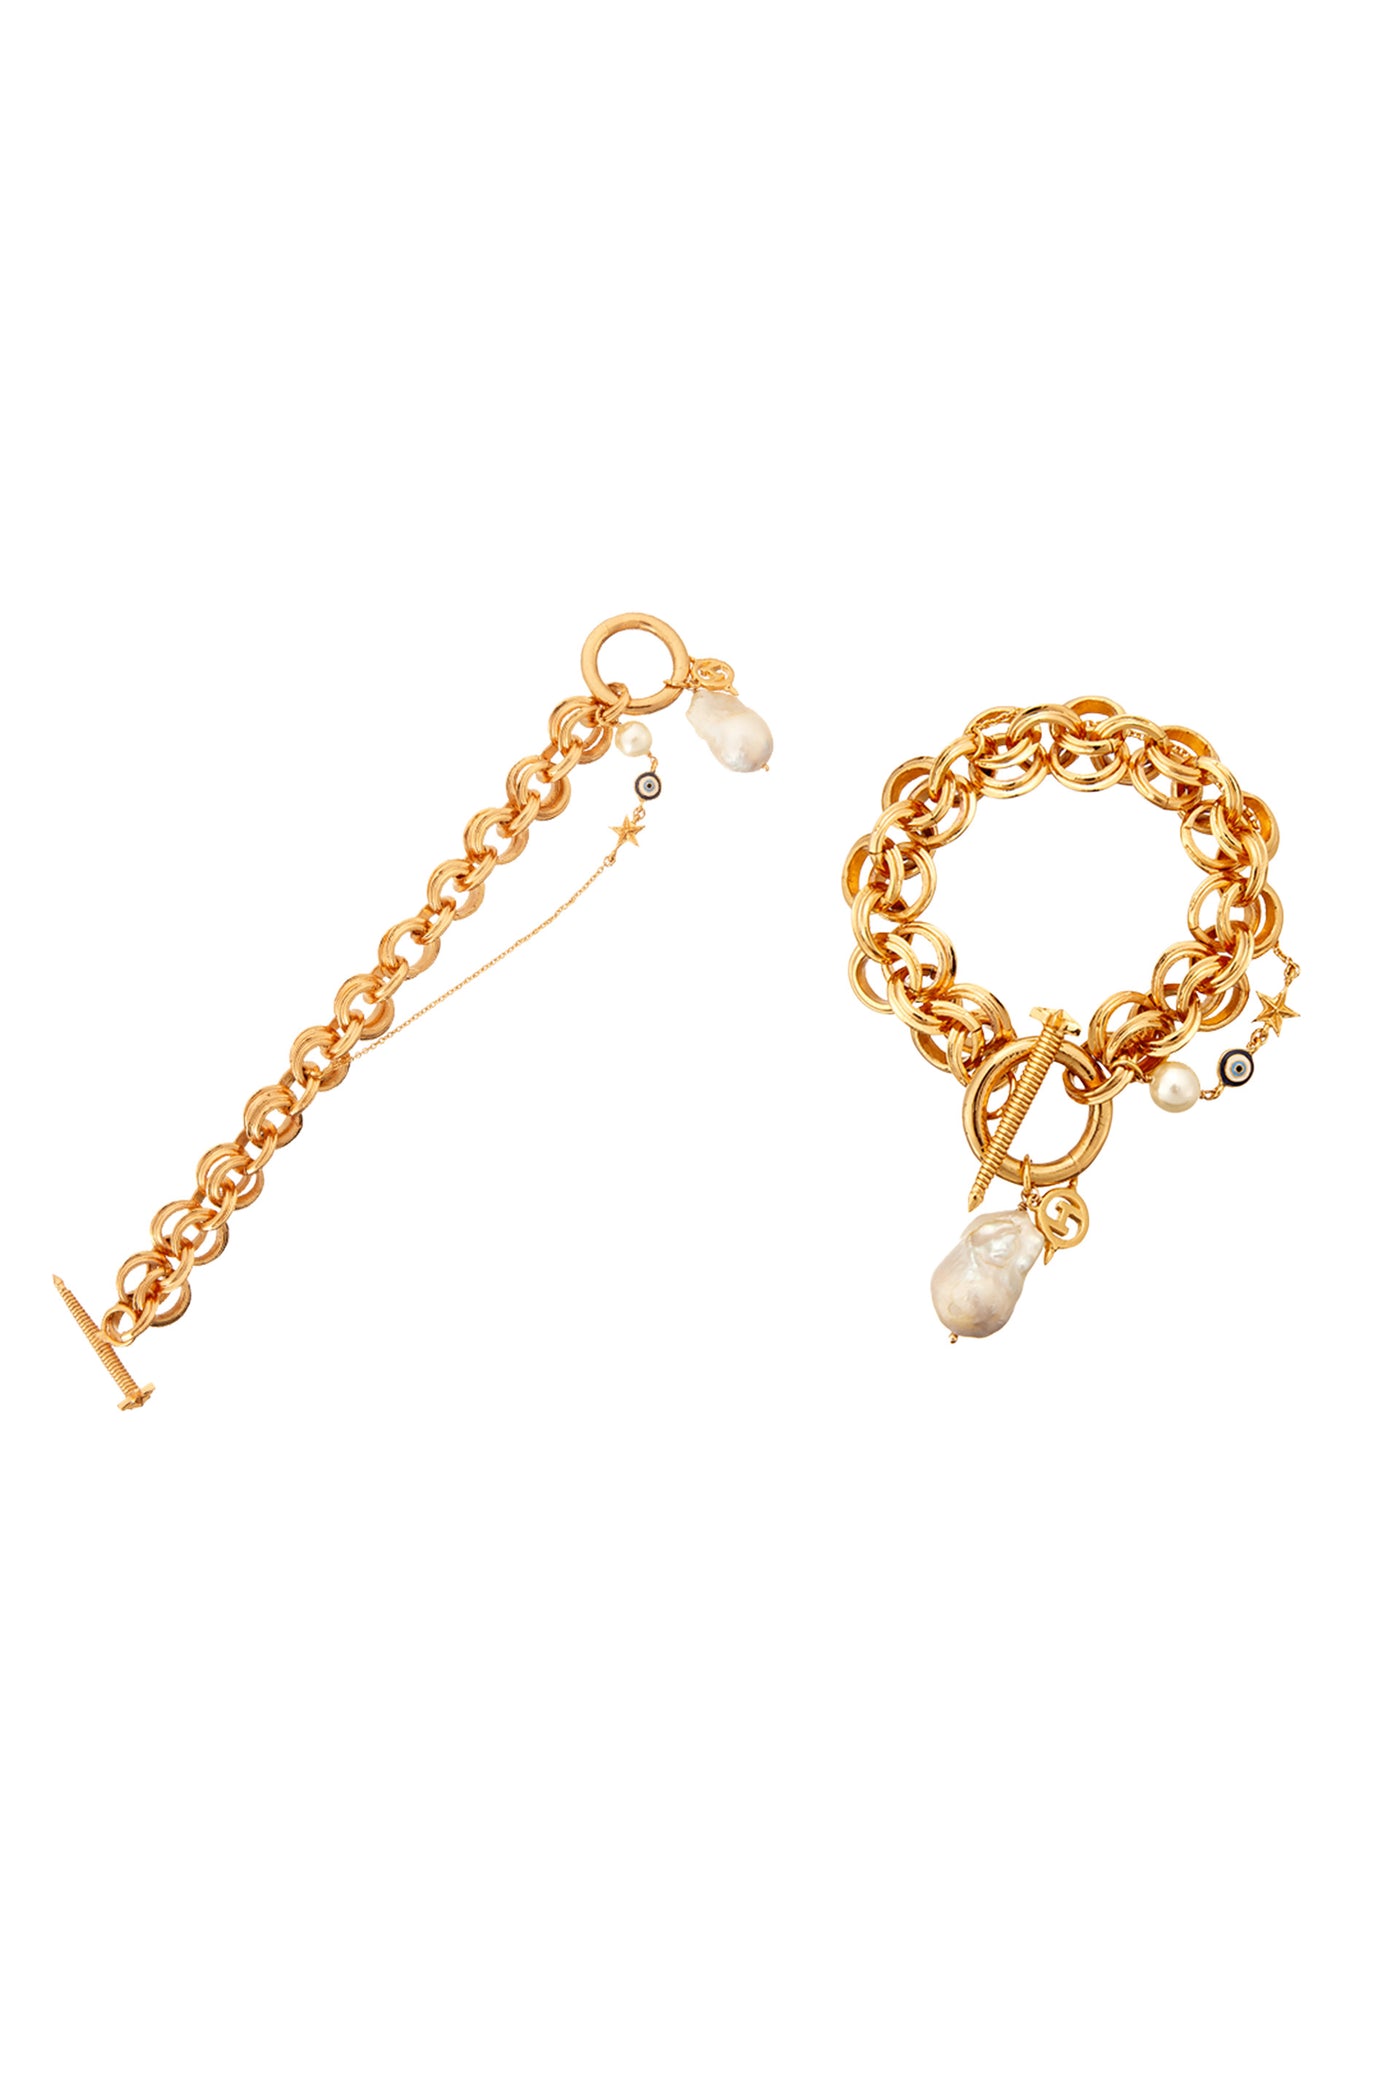 outhouse jewellery Pearls d'Amour Bracelet gold online shopping melange singapore fashion jewellery designer wear